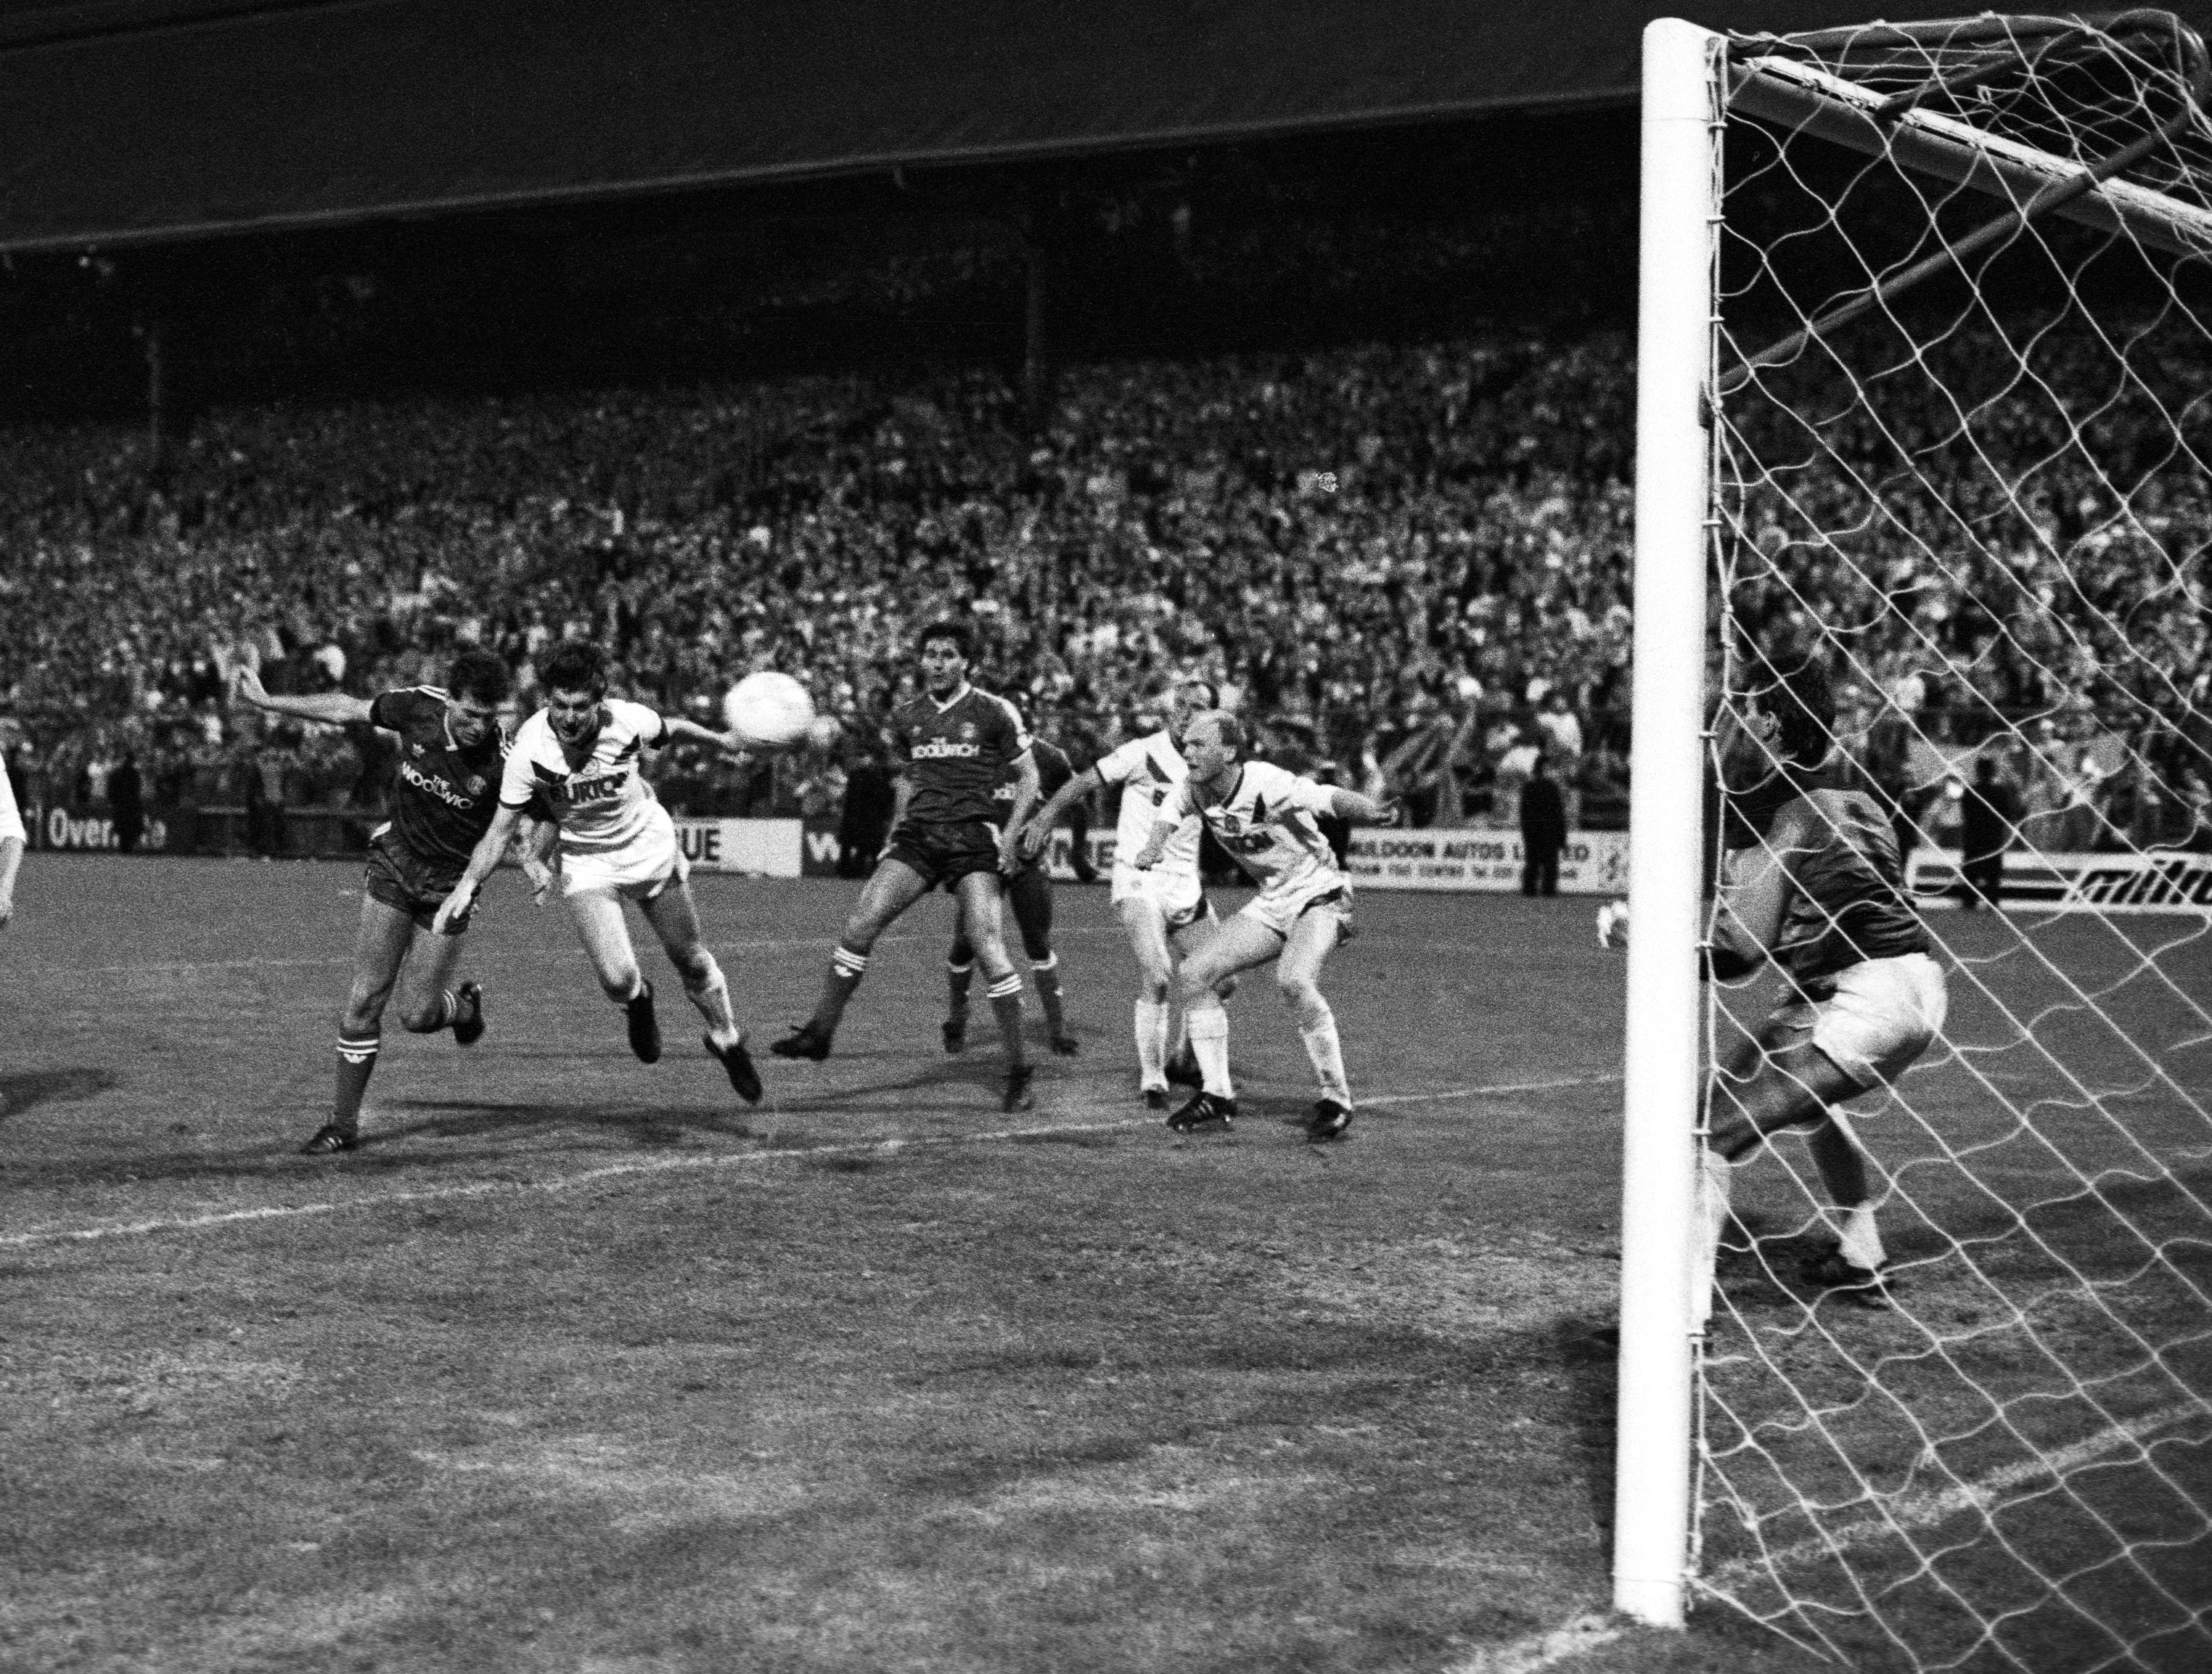 Peter Shirtliff scores for the Addicks against Leeds United in the play-off final replay in 1987